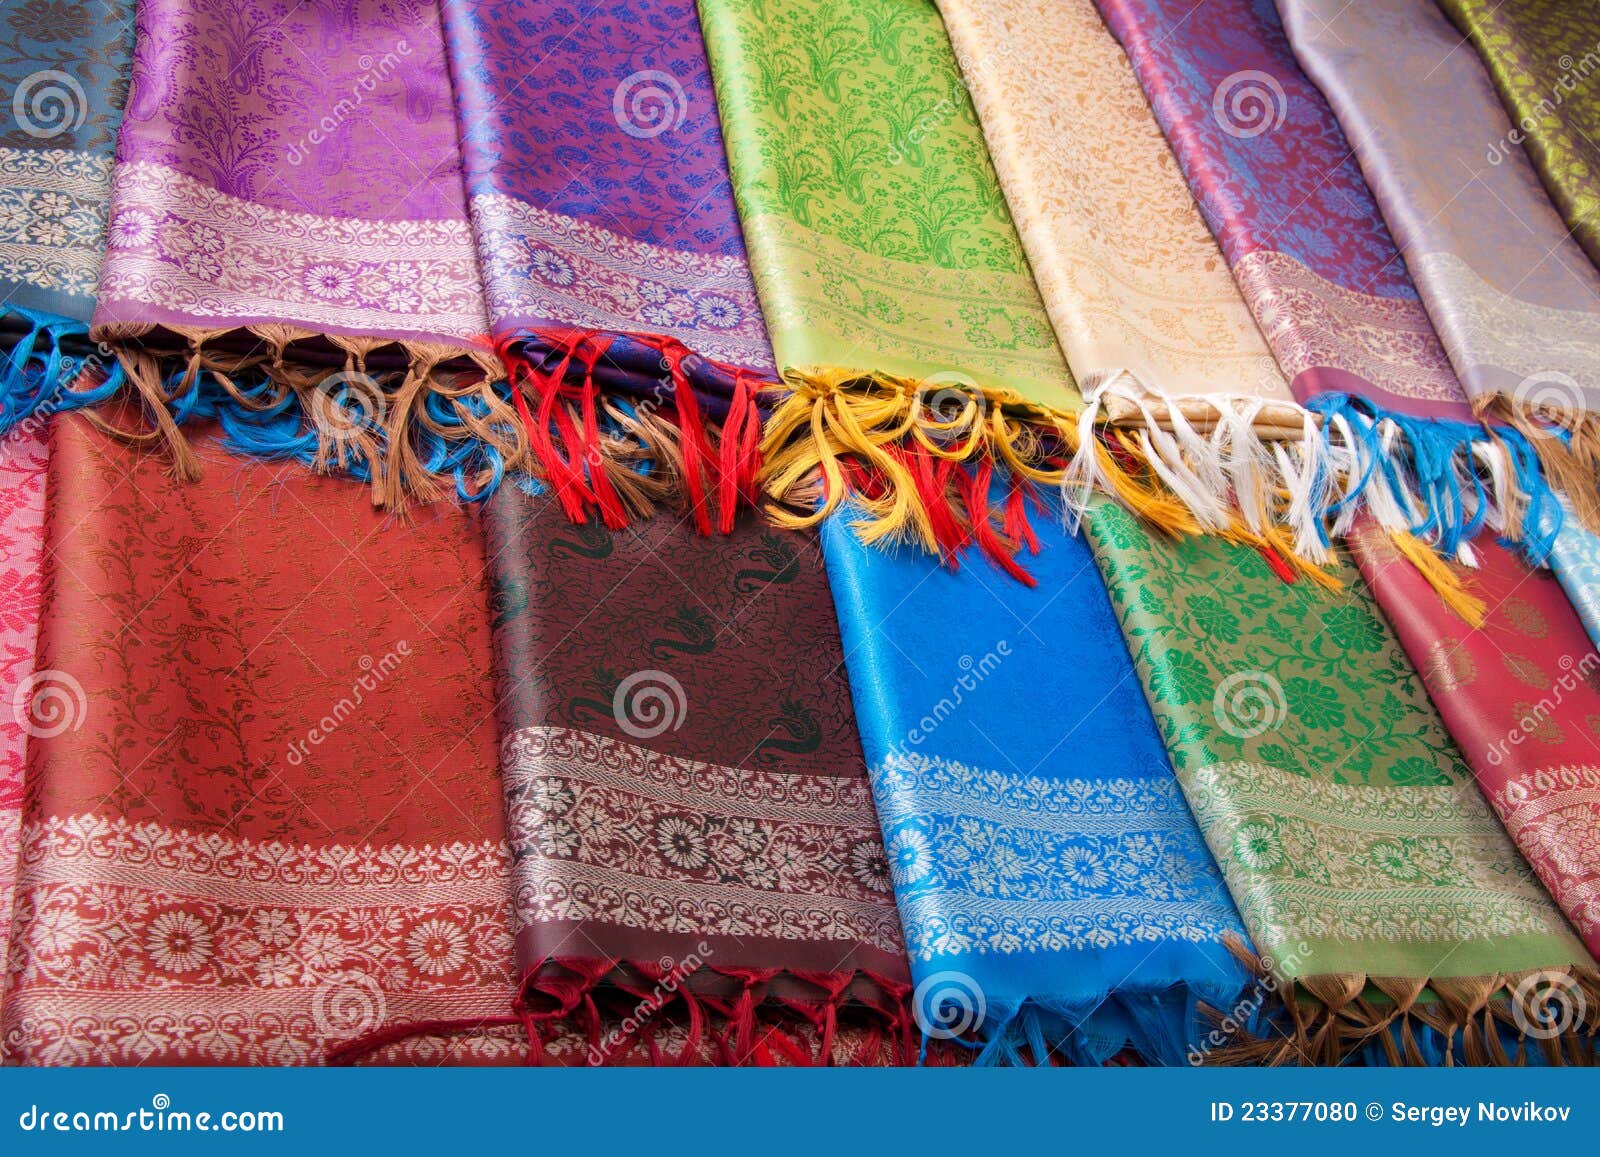 Indian fabric counter stock photo. Image of cloth, color - 23377080